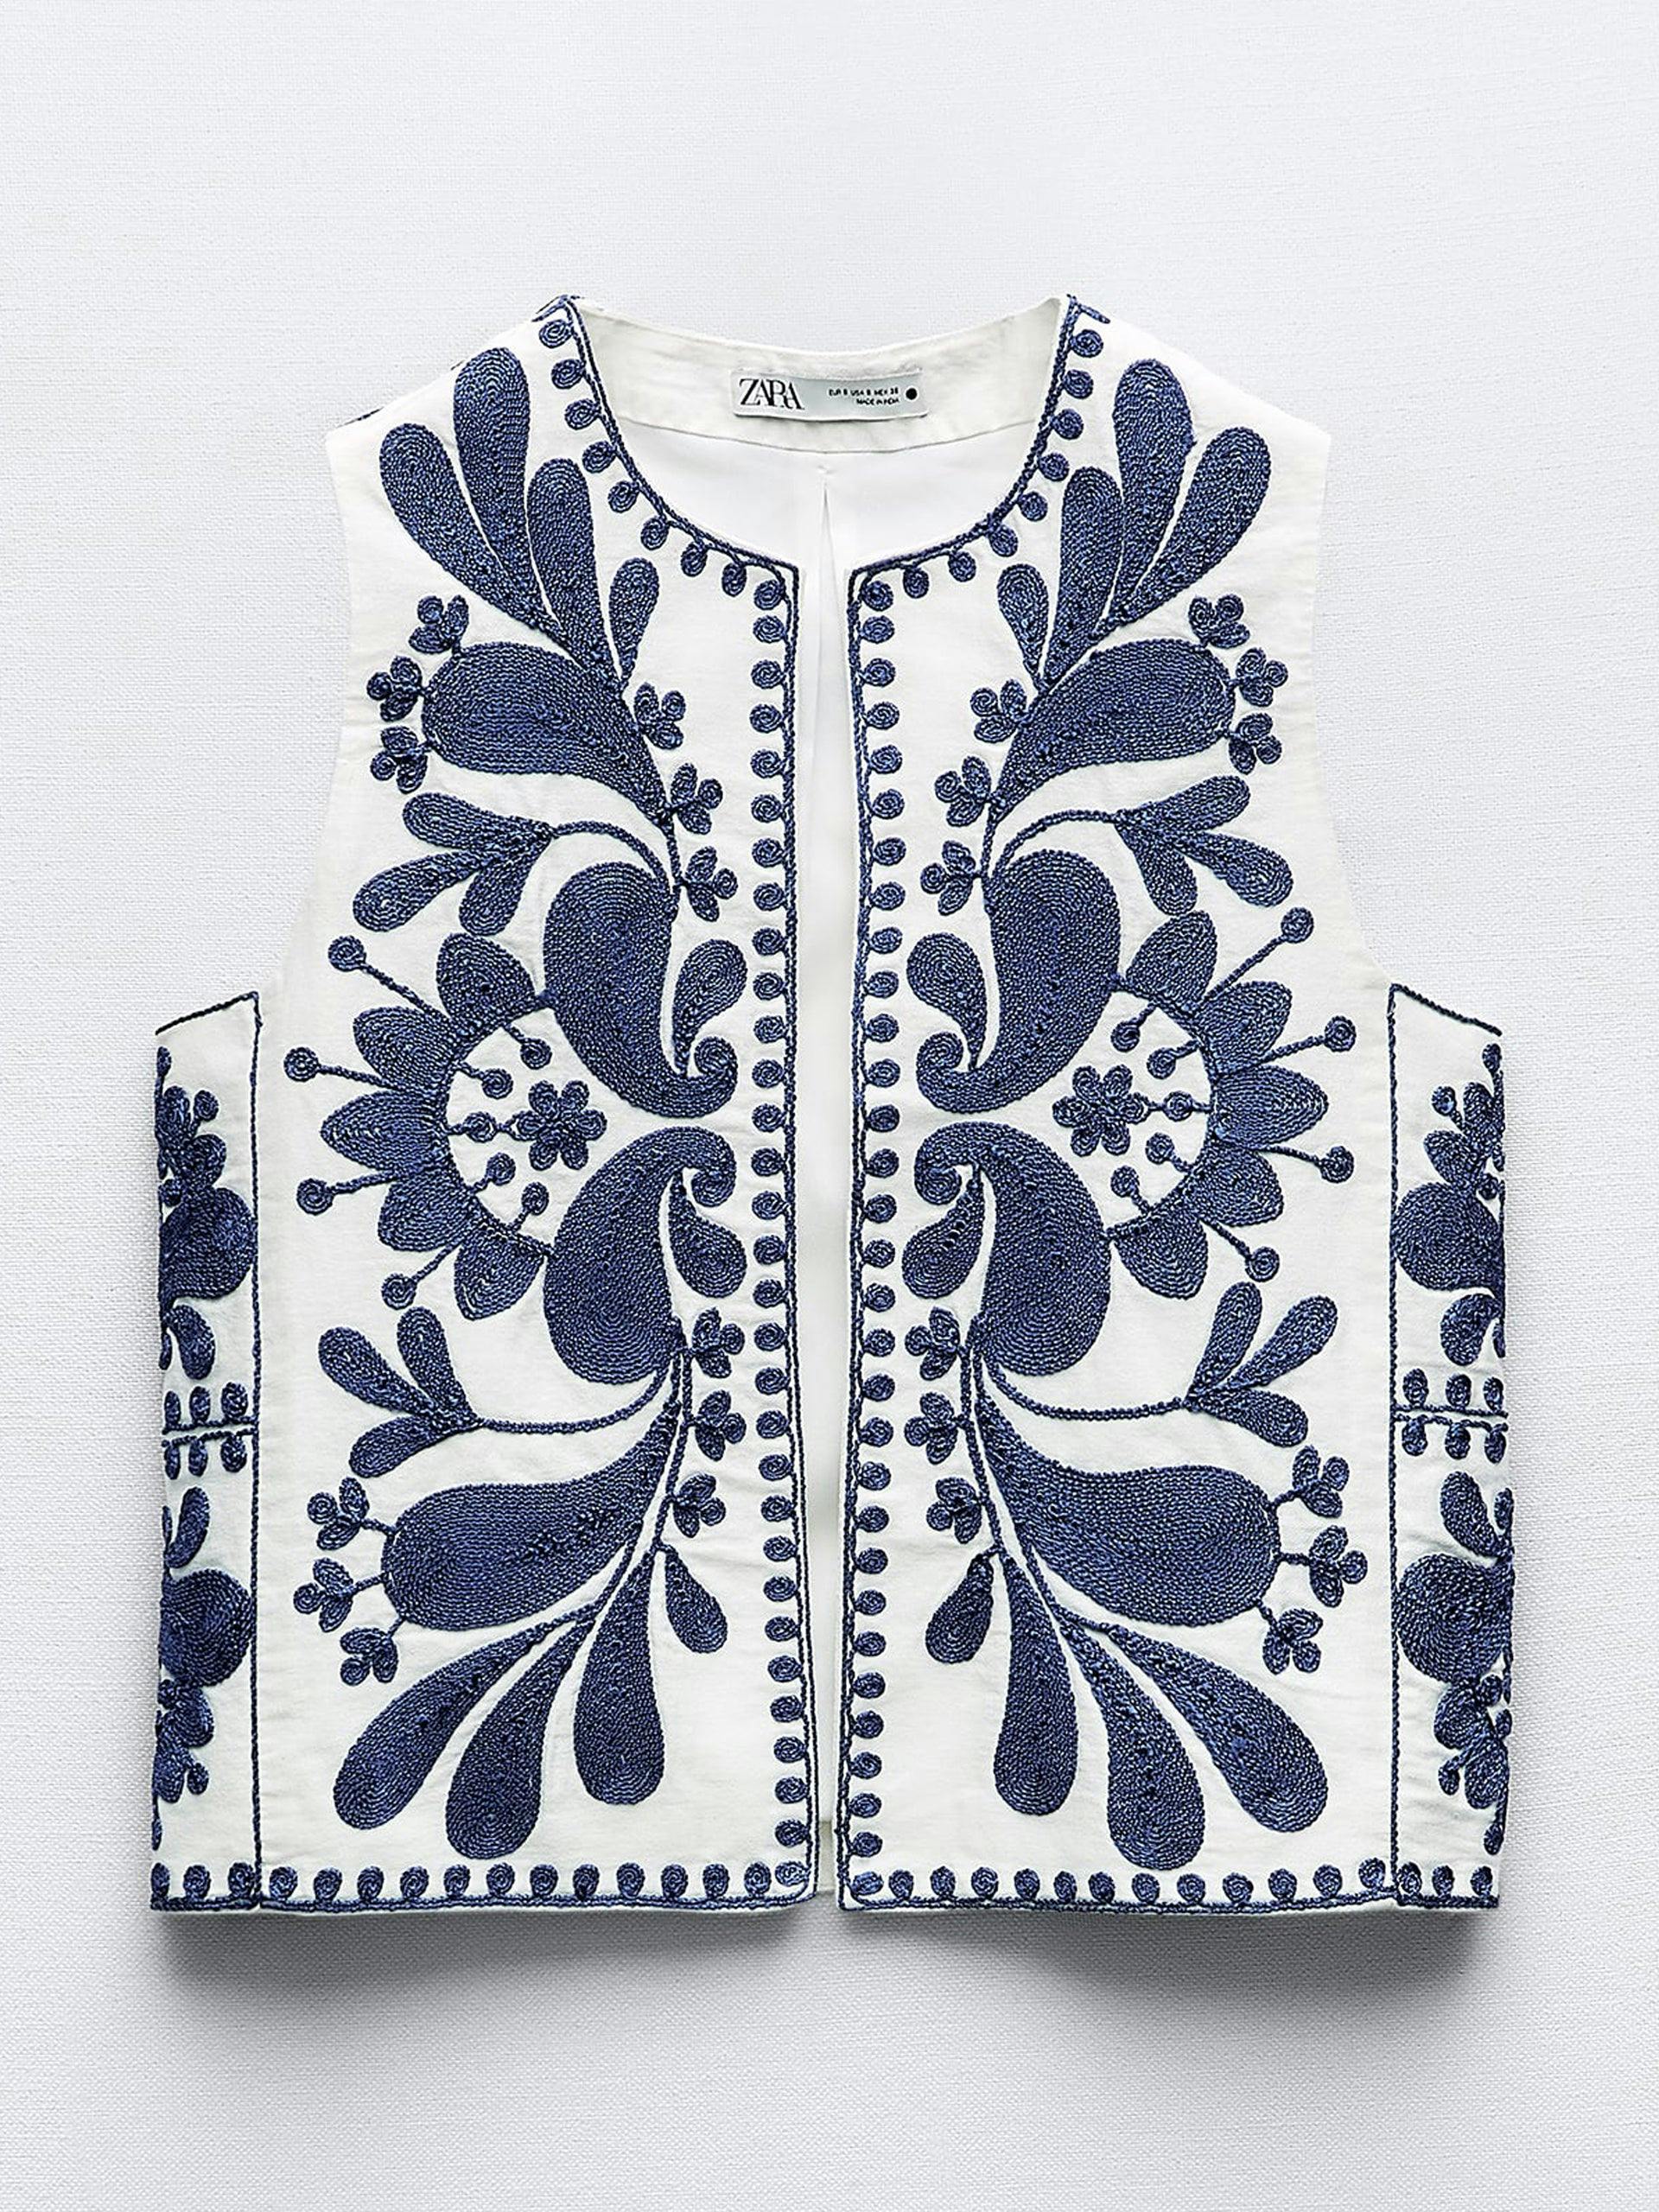 Navy and white waistcoat with contrast embroidery